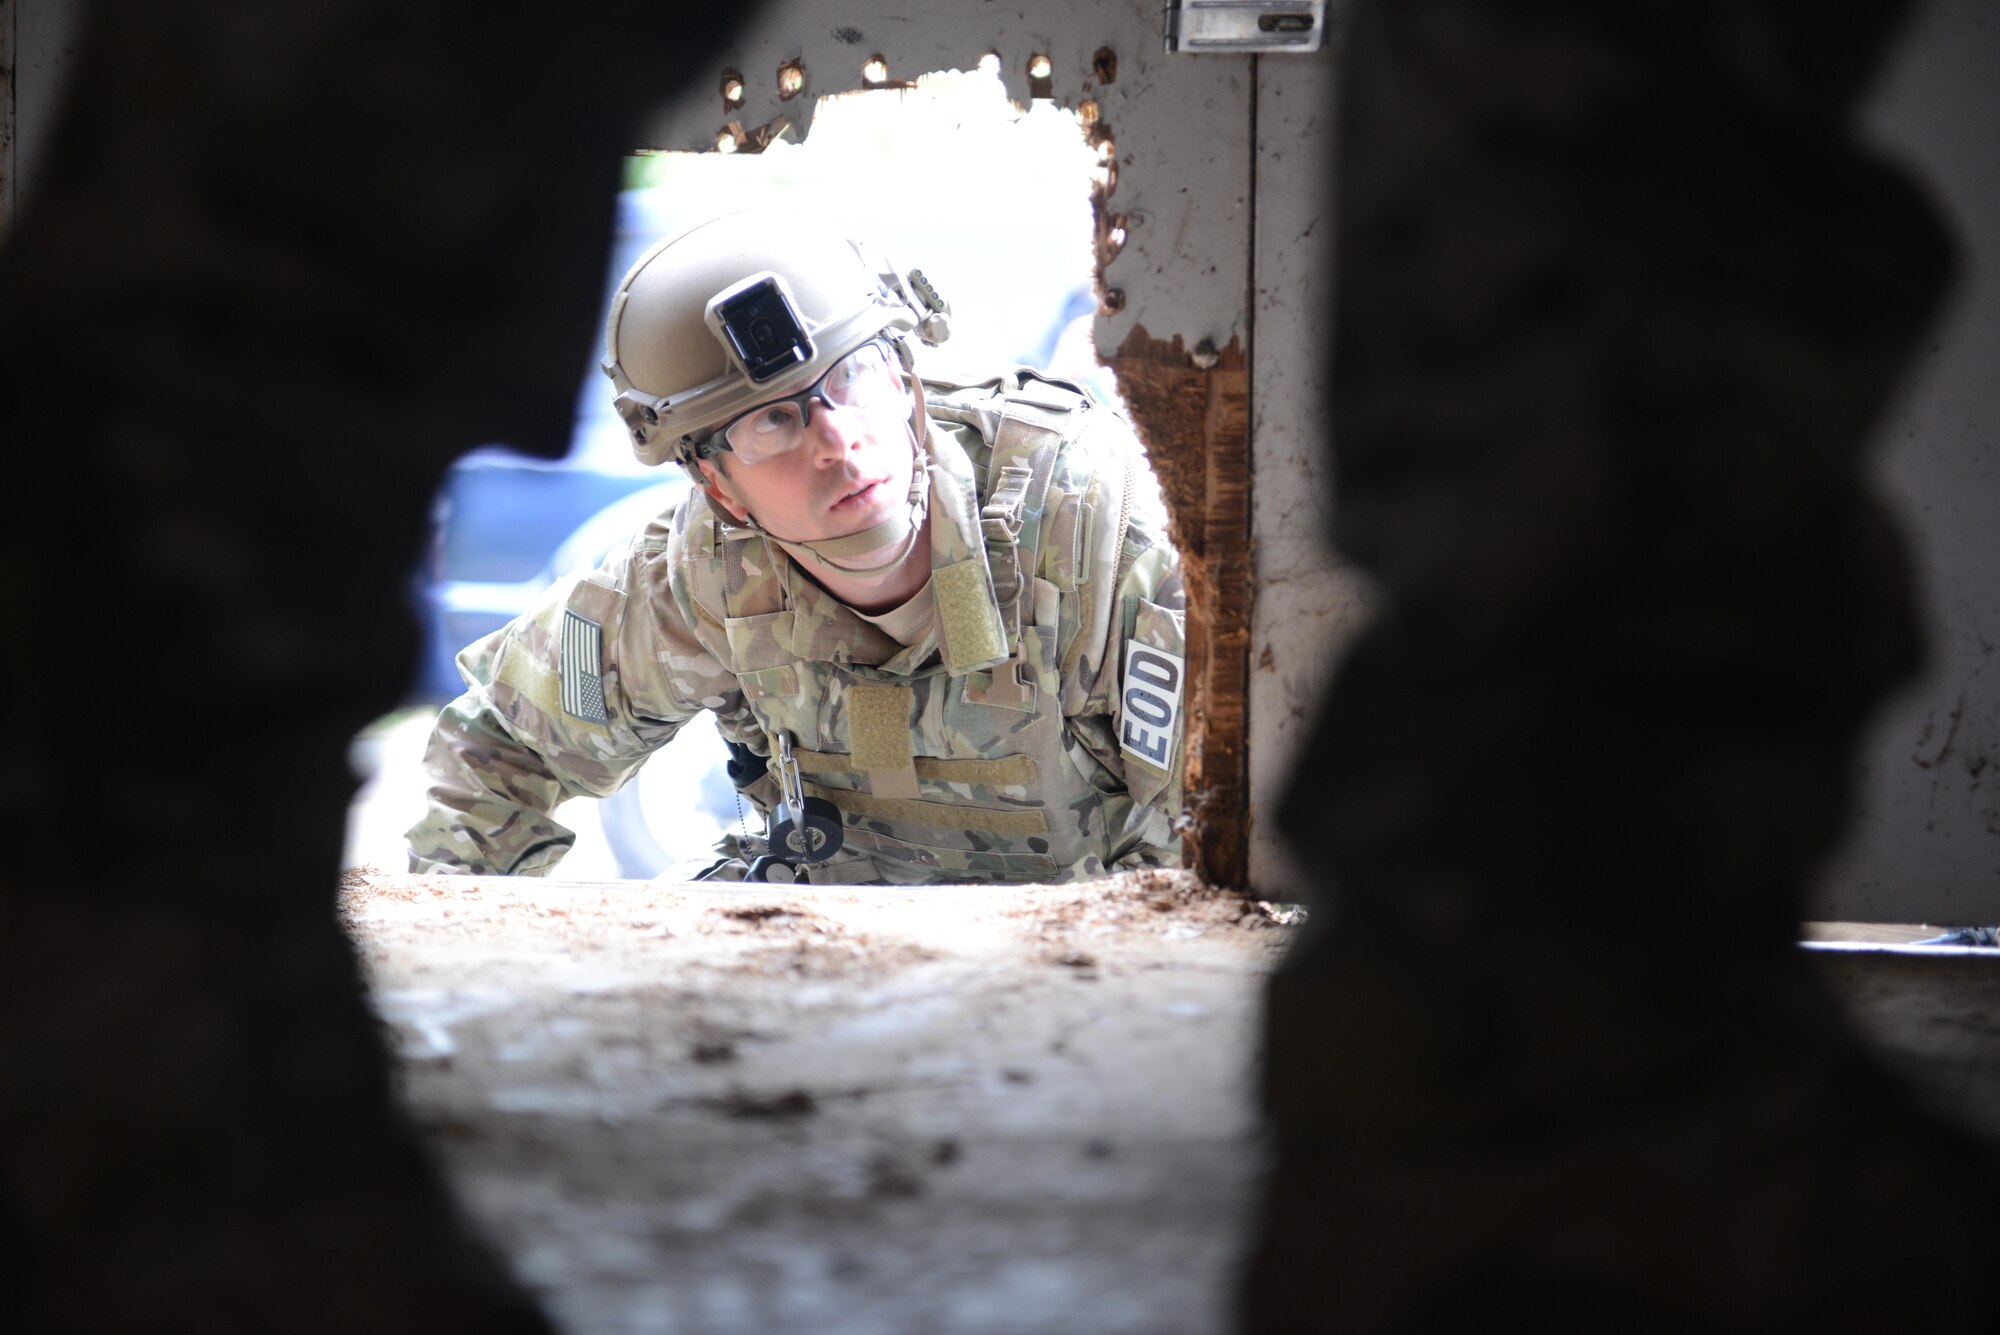 Tech. Sgt. Noah Cheney, 9th Civil Engineer Squadron explosive ordnance disposal technician, prepares to enter an abandoned structure known as the “bomb factory” during an exercise May 5th, 2016, at Clear Lake, California. Cheney and other EOD technicians were tasked to eliminate numerous improvised explosive devices and a radioactive dispersal device within the abandoned structure. (U.S. Air Force photo by Senior Airman Bobby Cummings)